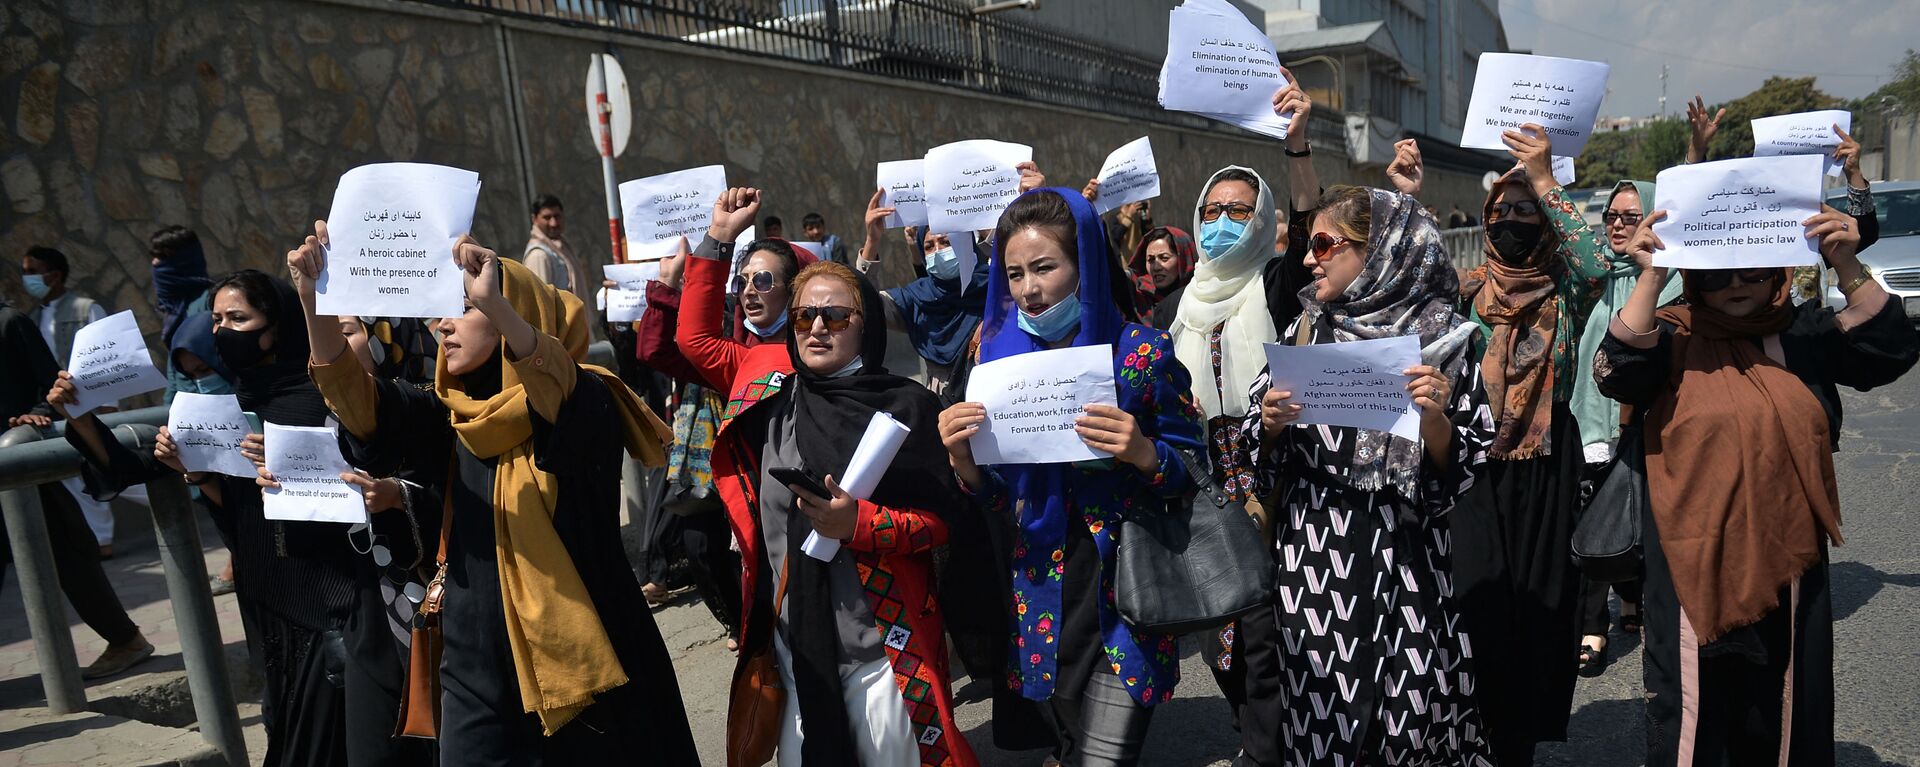 Afghan women take part in a protest march for their rights under the Taliban rule in the downtown area of Kabul on September 3, 2021.  - Sputnik International, 1920, 20.08.2022